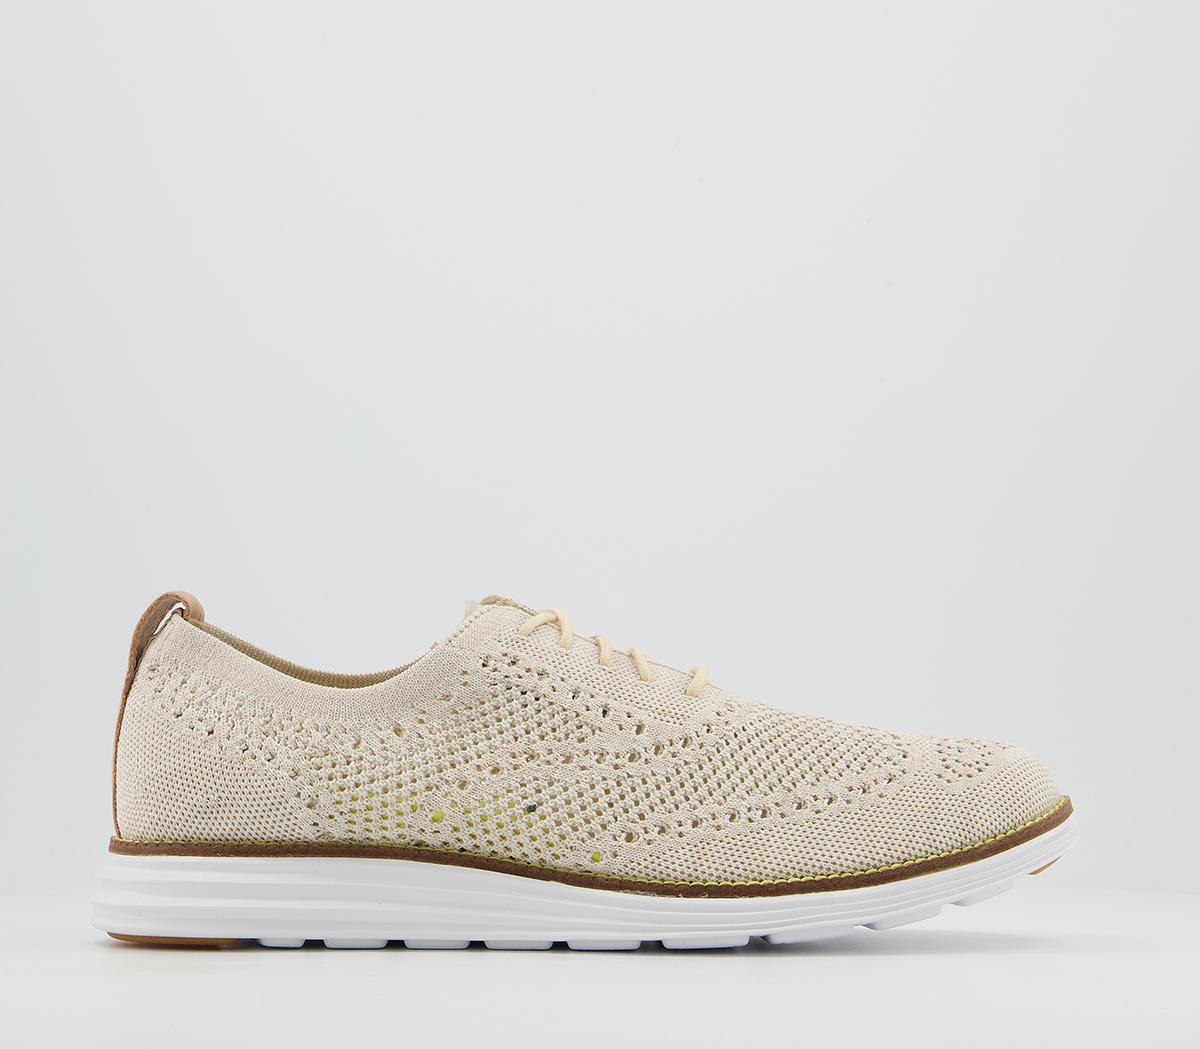 Cole HaanOriginal Grand Stitchlite Oxford ShoesCement Twisted Knit Optic White